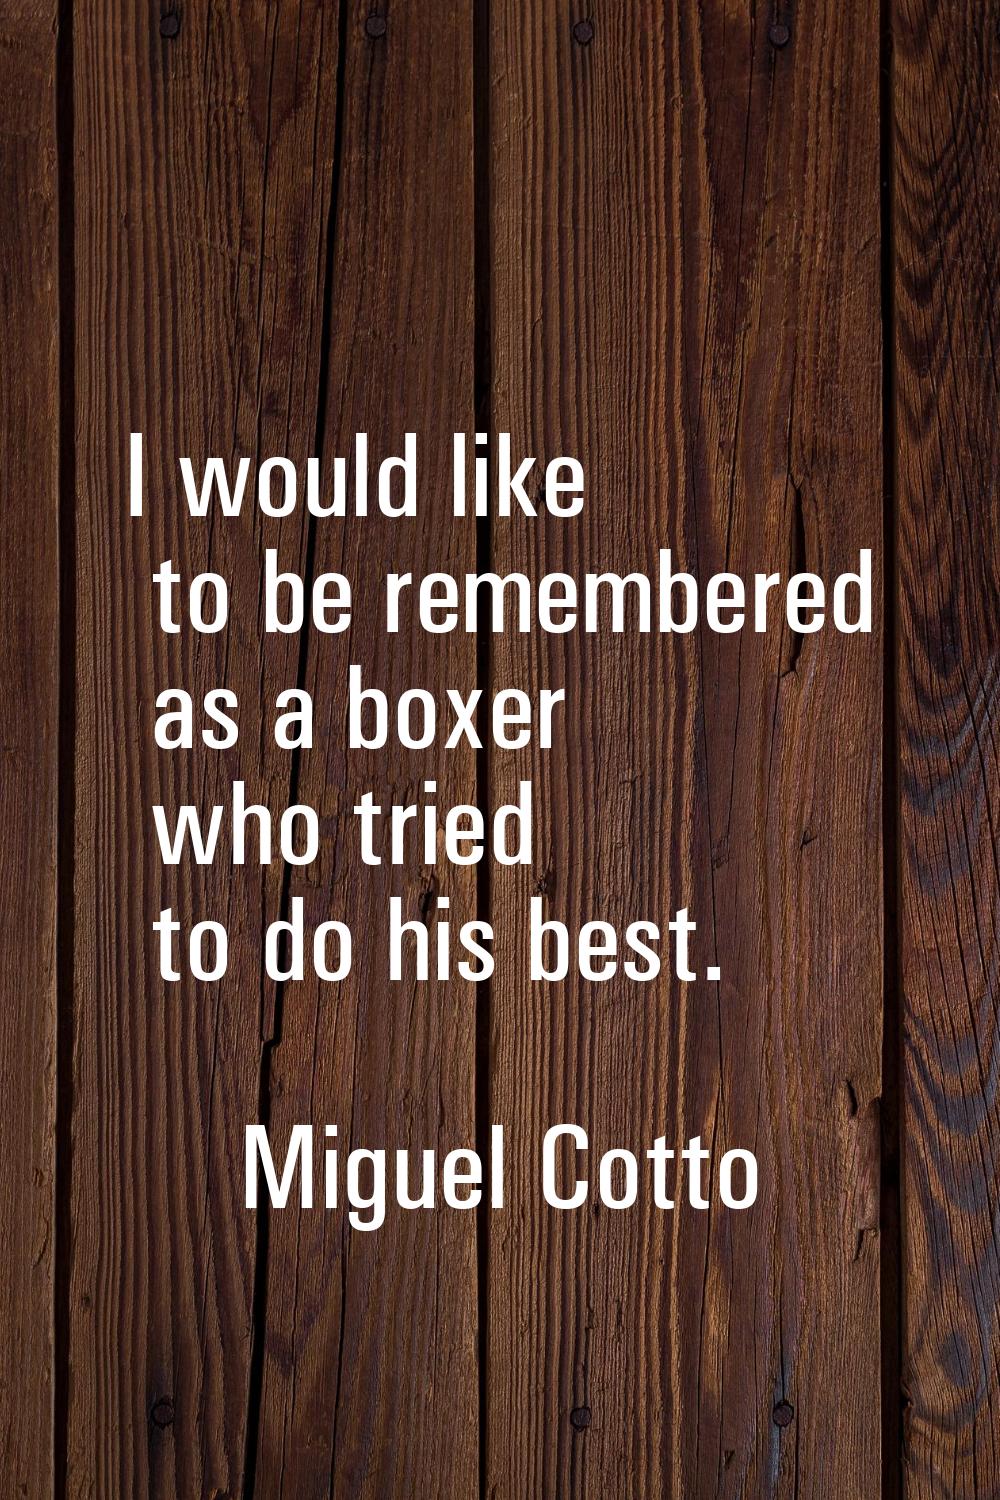 I would like to be remembered as a boxer who tried to do his best.